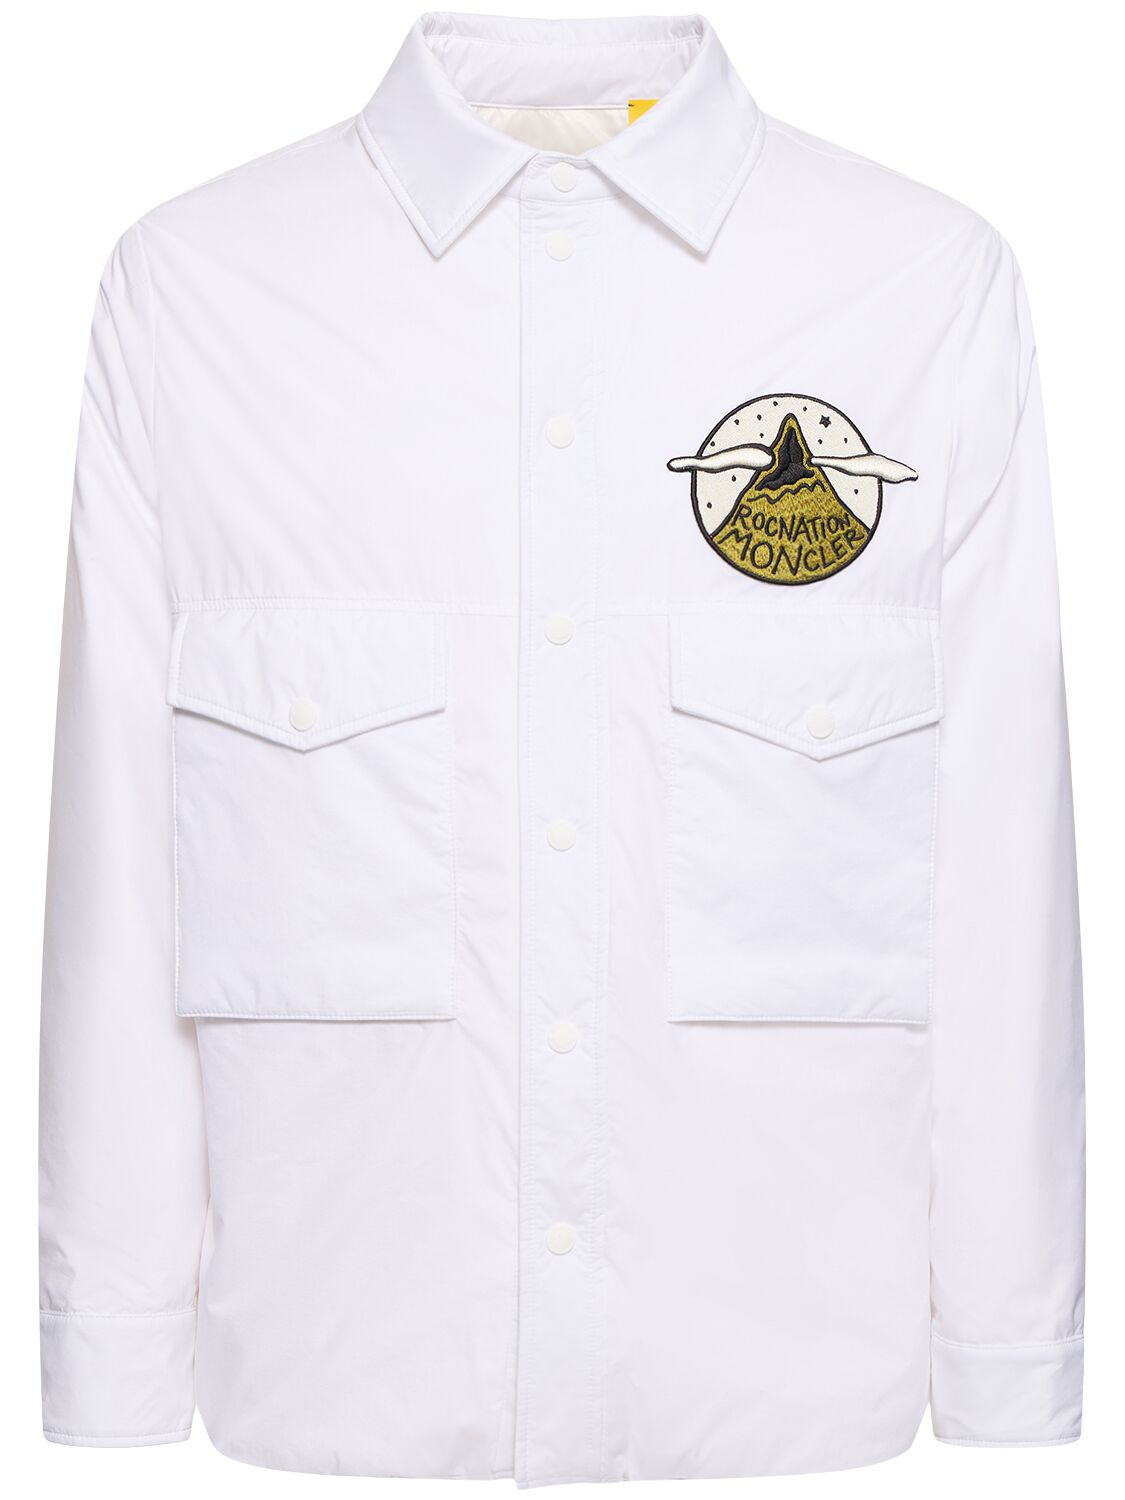 Moncler Genius Moncler X Roc Nation Designed By Jay-z In Optic White